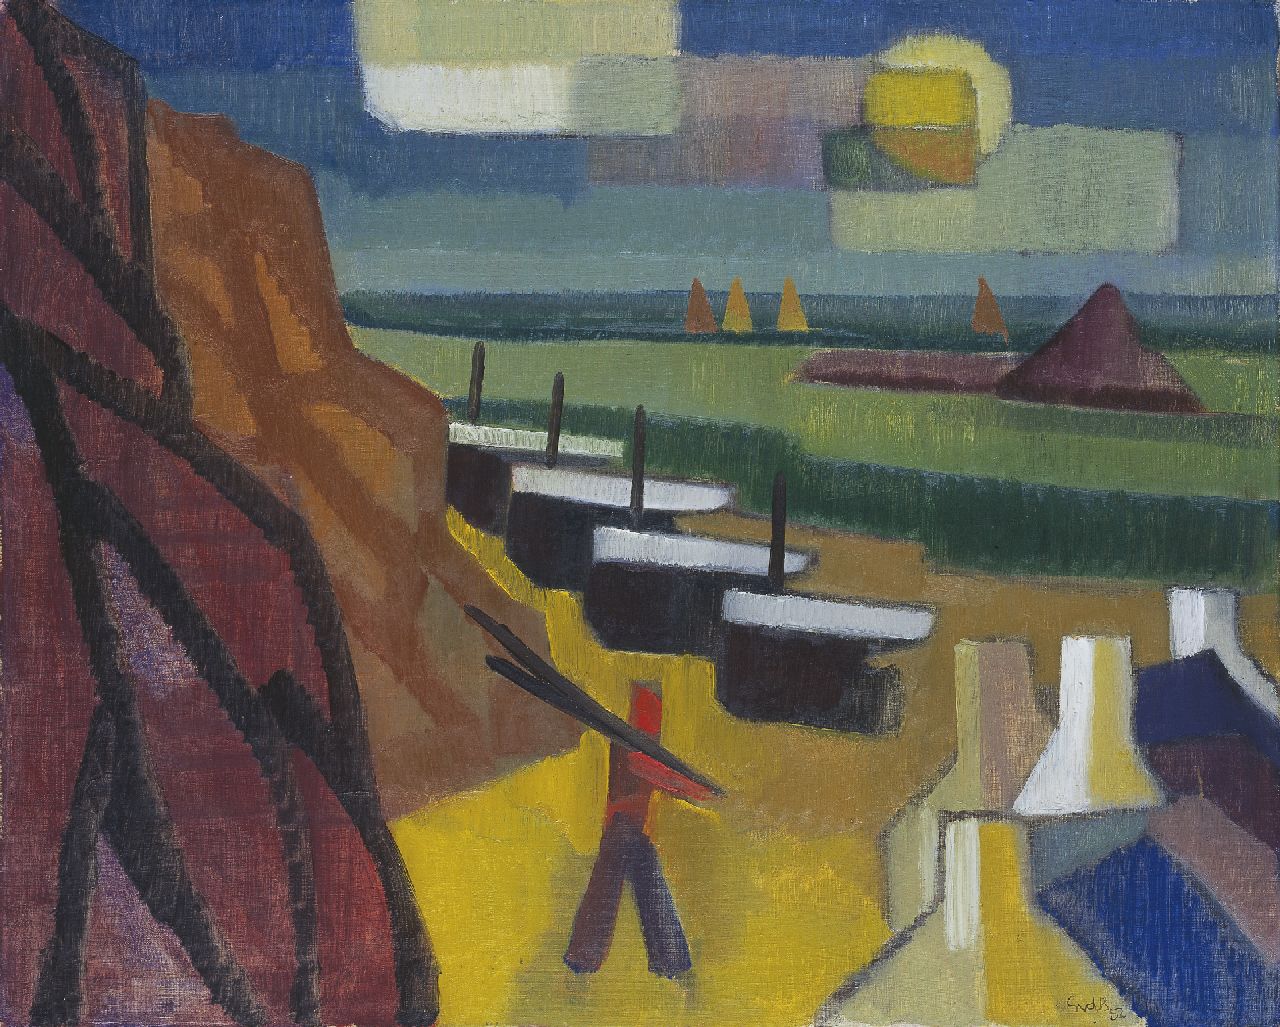 Berg S.R. van den | Sybren Ridsert 'Siep' van den Berg, Fishing boats on the beach of Cancale, Bretagne, oil on canvas 64.8 x 80.0 cm, signed l.r. with initials and dated '52